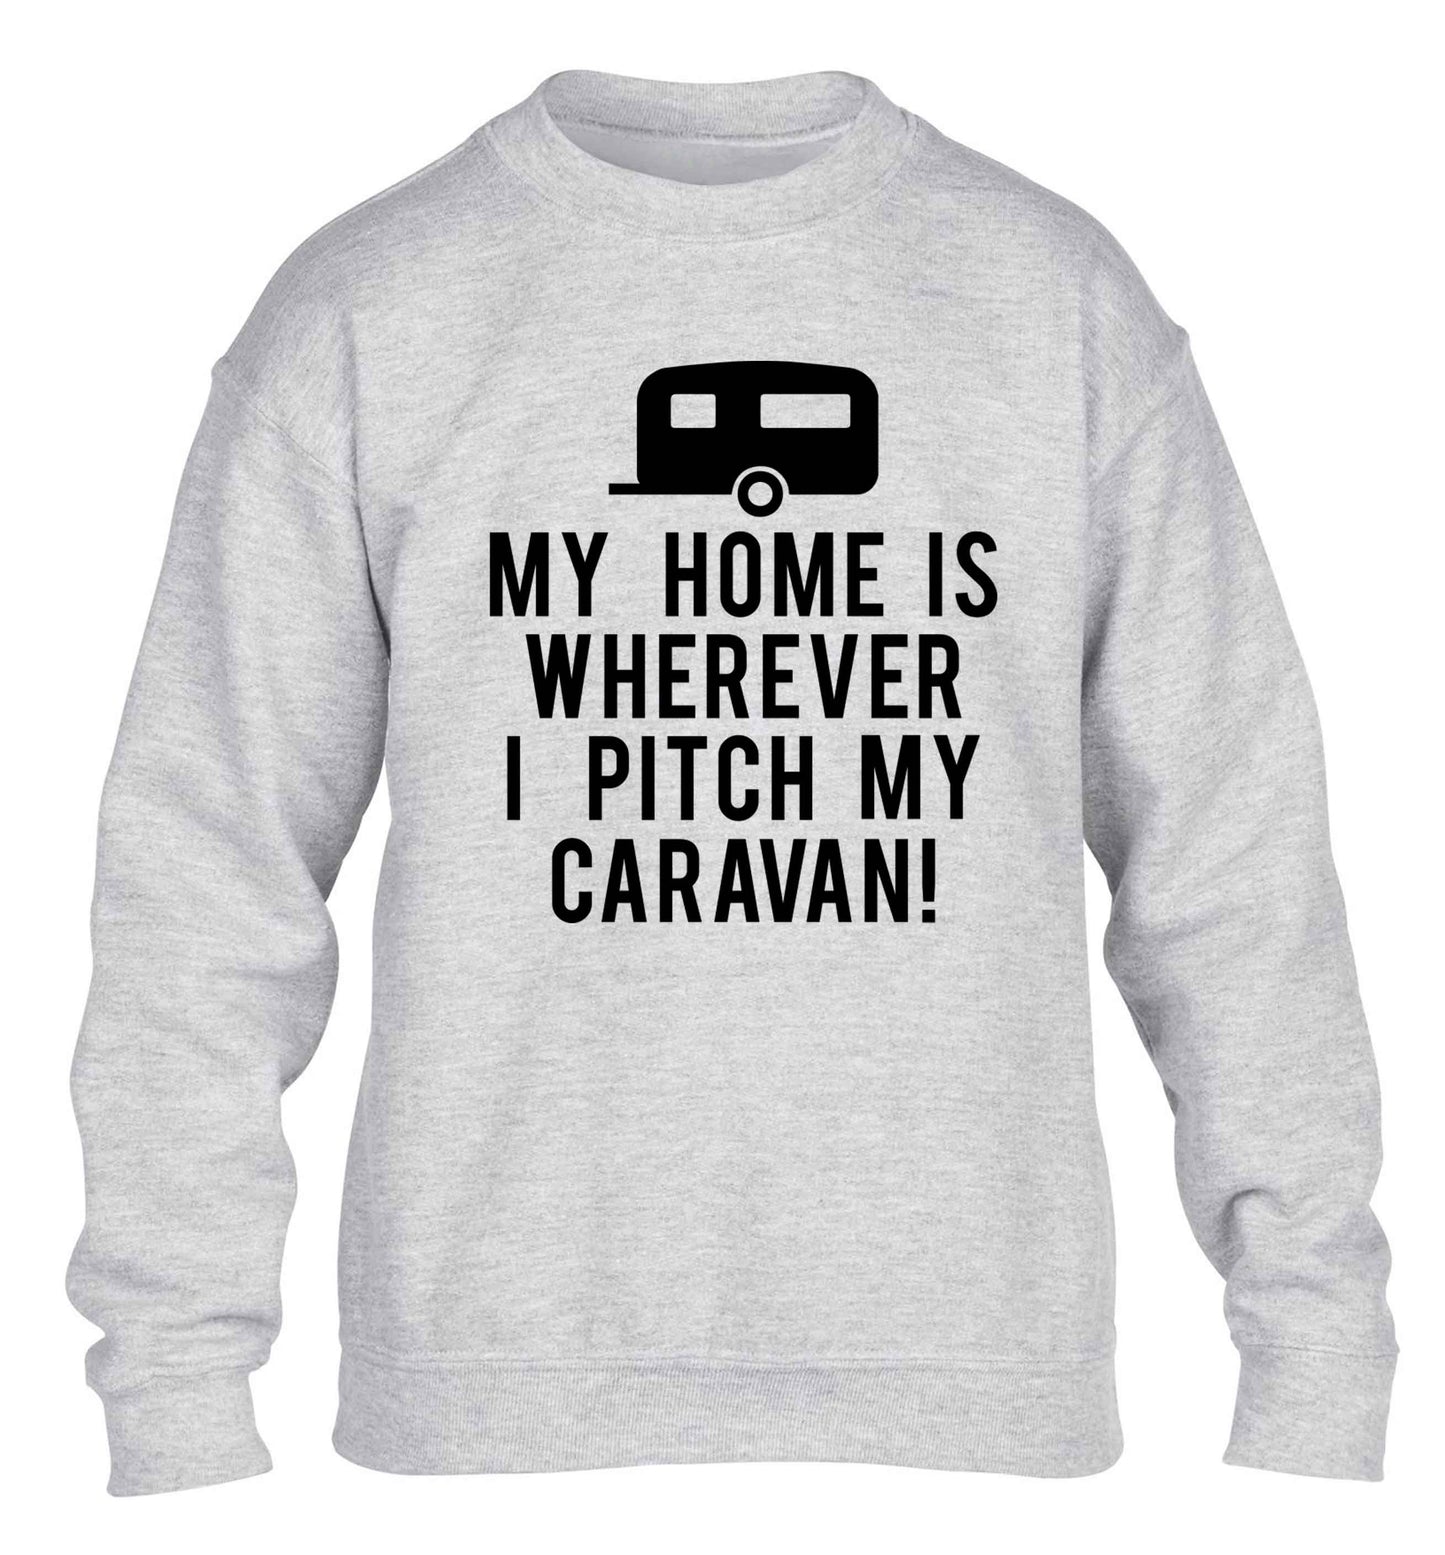 My home is wherever I pitch my caravan children's grey sweater 12-13 Years